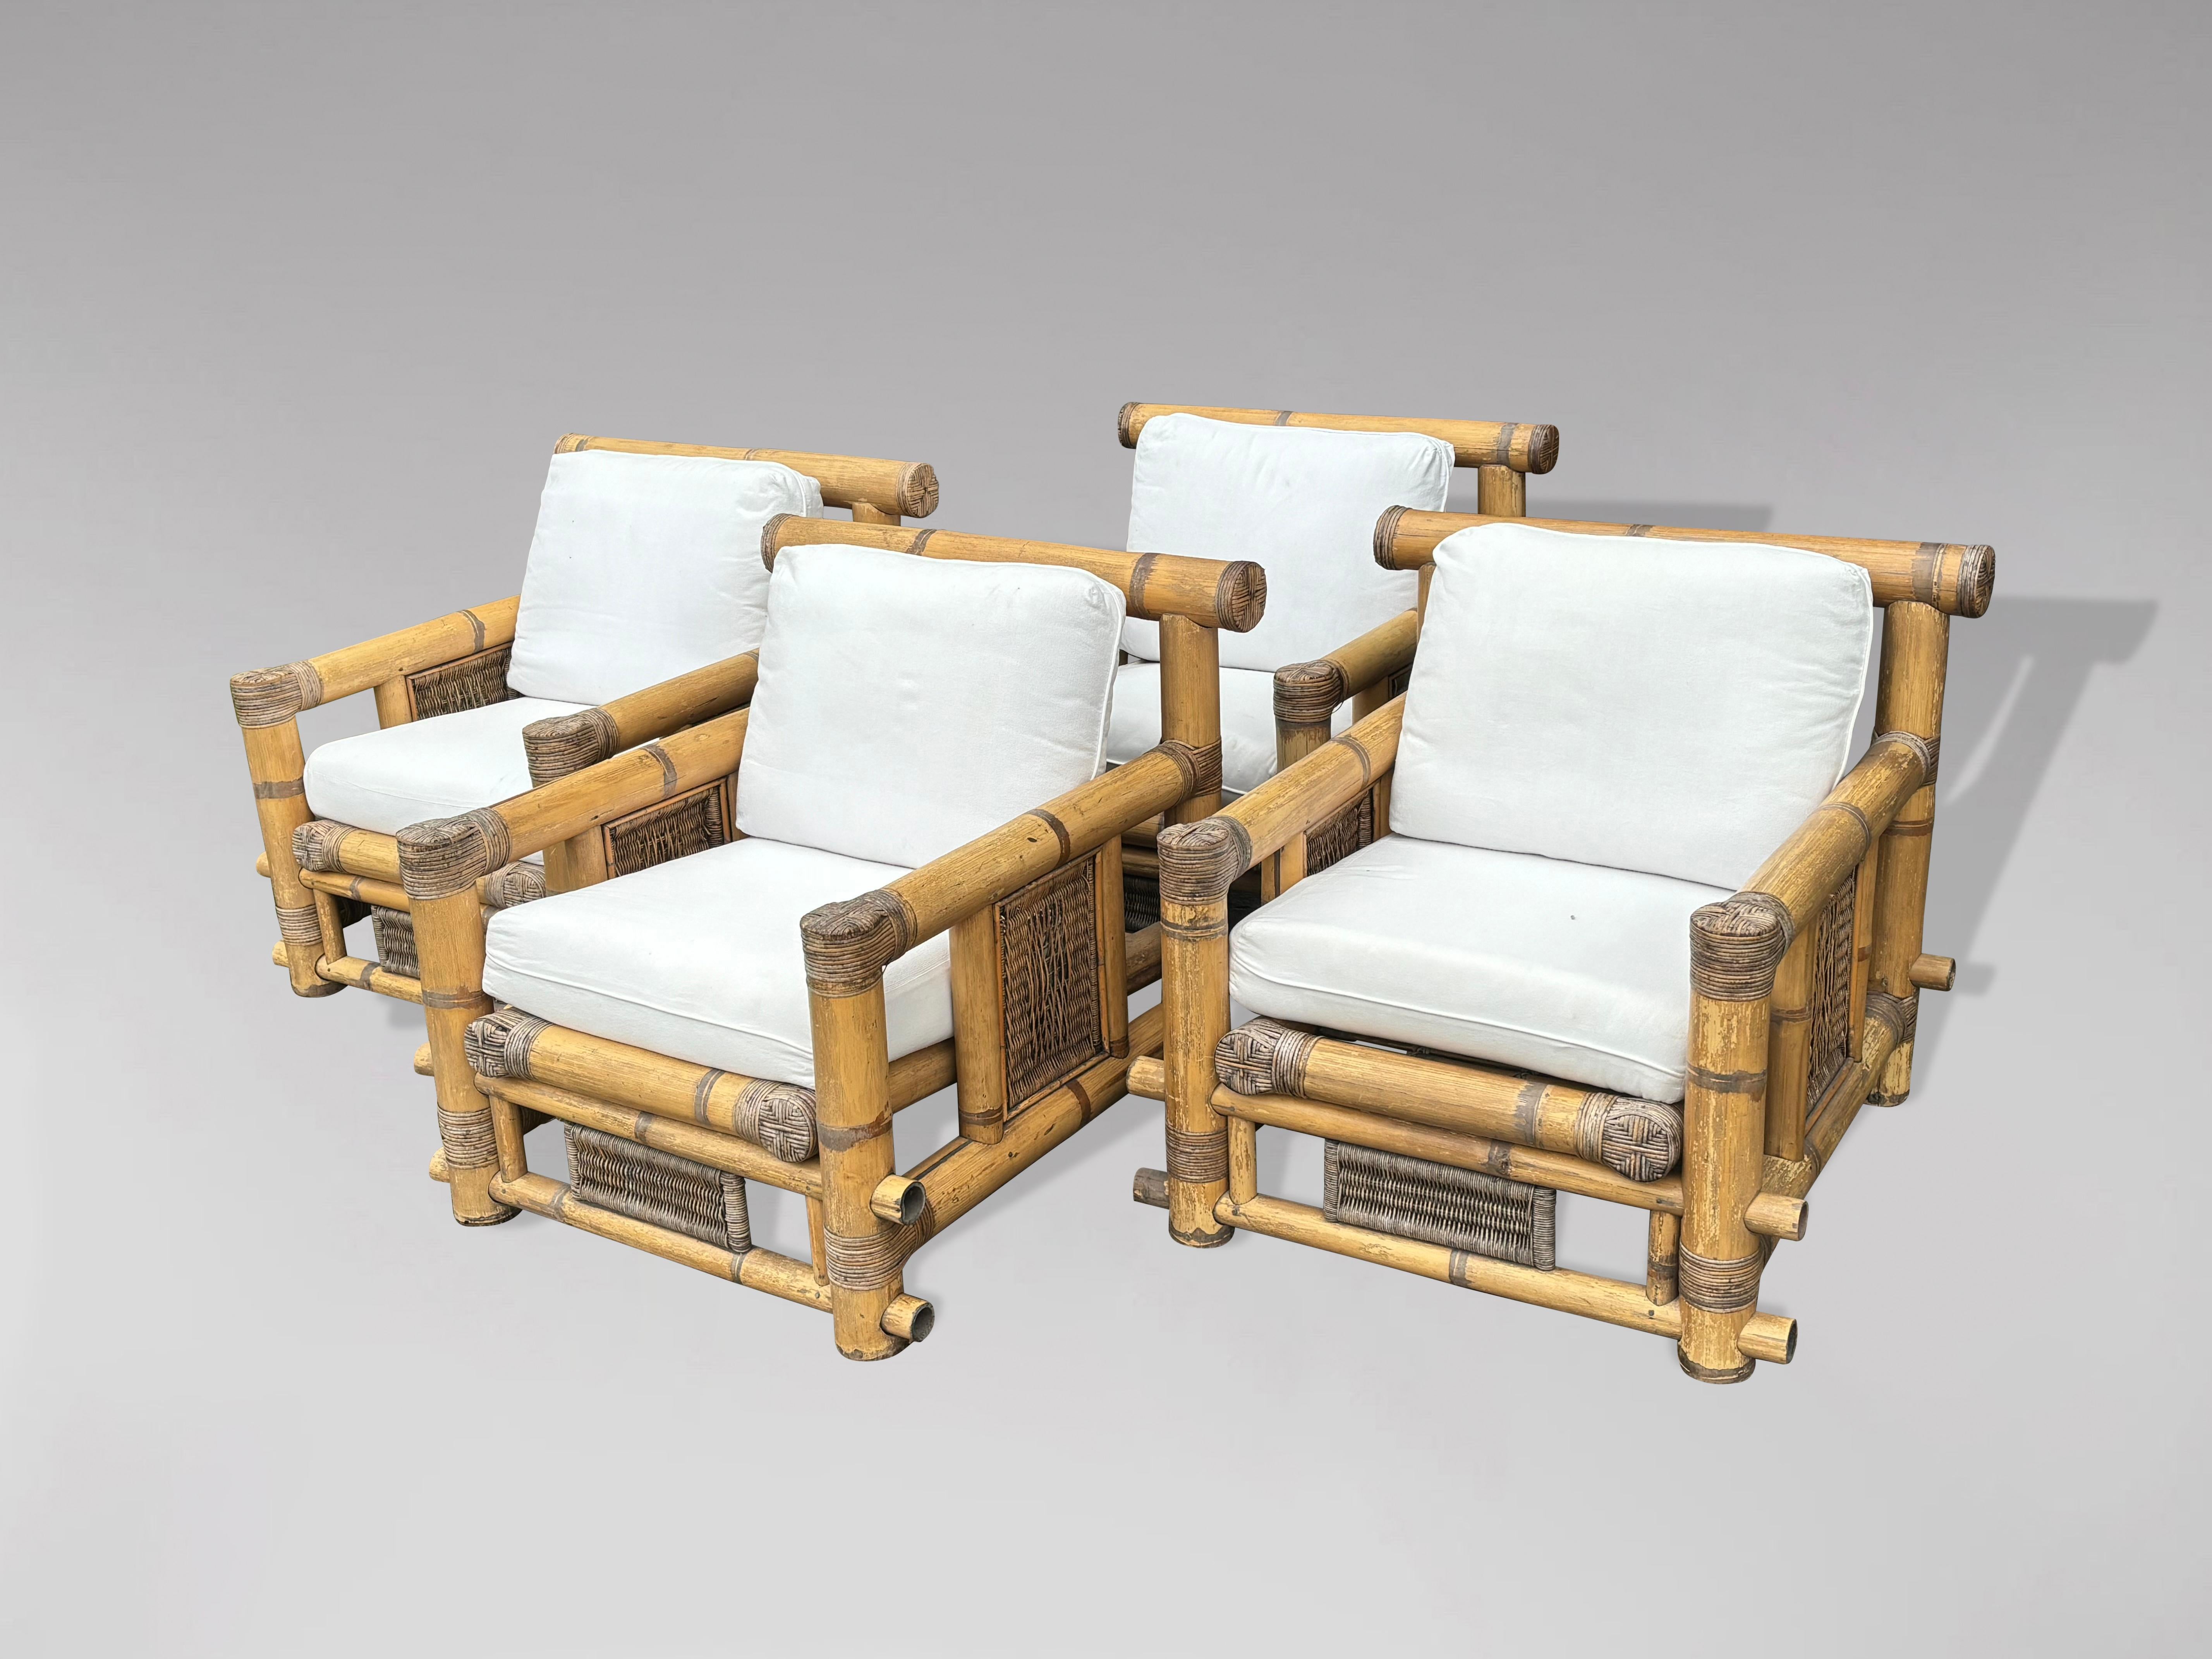 A set of 4 large club lounge coastal armchairs, designed by Budji Layug, circa 1980. Very large, mature stalks of cut bamboo cleverly constructed to execute an over-scale armchair with beautiful contrasting cane and rattan accents. Each armchair